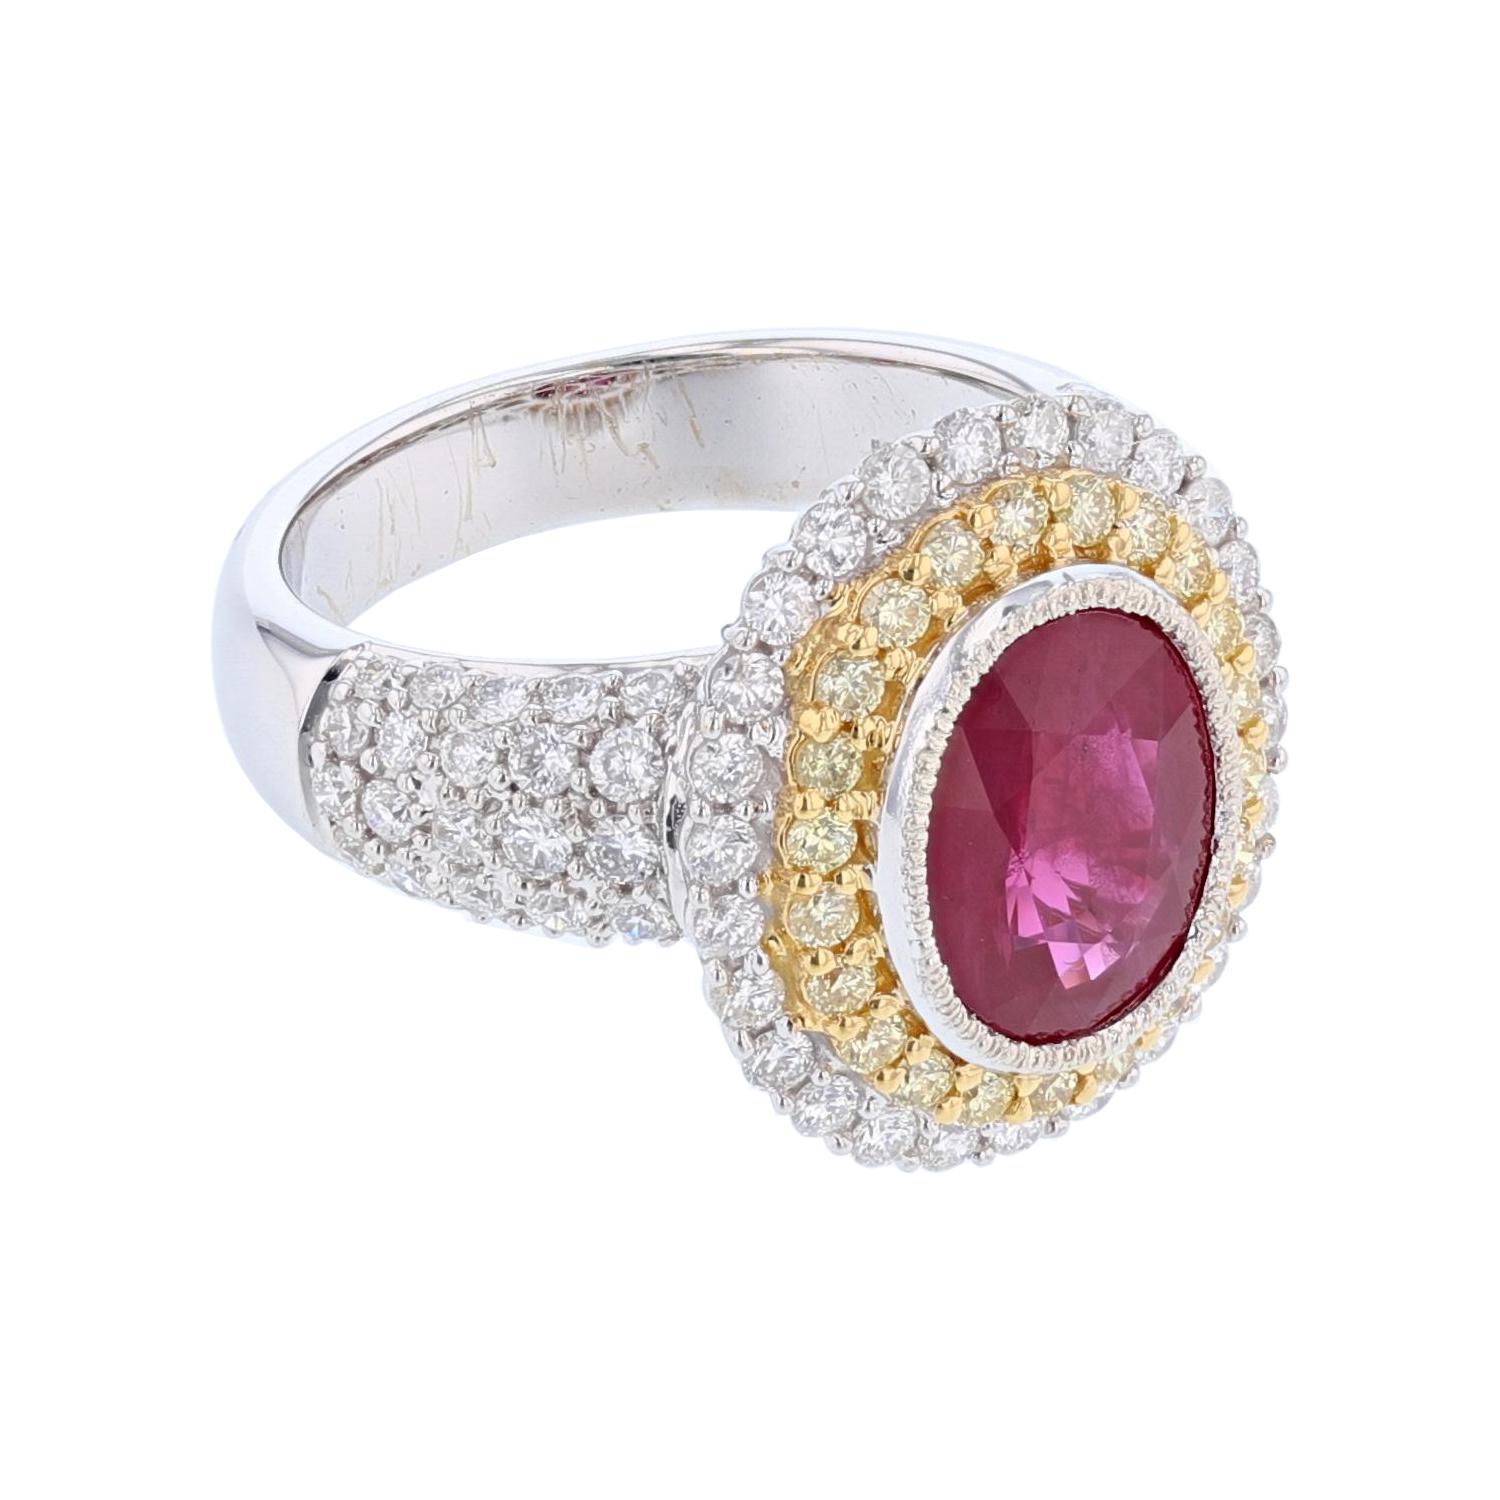 This ring is made in 18k white and yellow gold and features a 3.02ct Oval Shape Natural Burmese Corundum Ruby with a GIA certificate. The certificate number is 